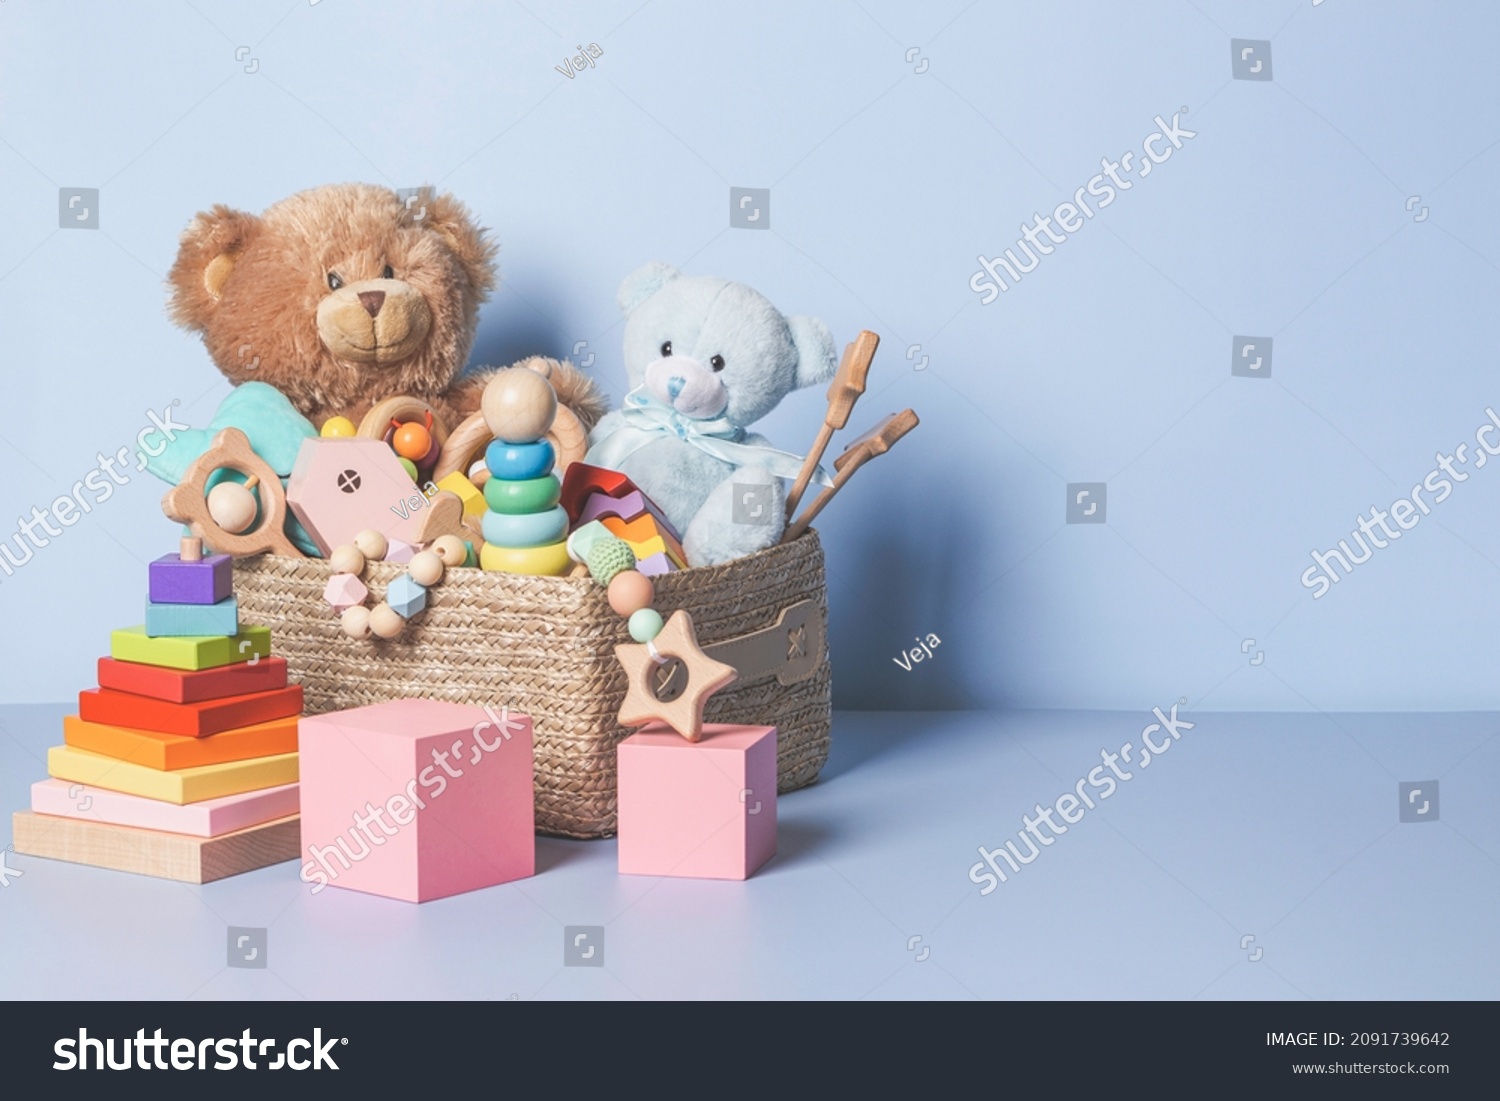 Toy box full of baby kid toys. Container with teddy bear, wooden rattles, stacking pyramid and wood blocks on light blue background. Cute toys collection for small children. Donation. Front view #2091739642